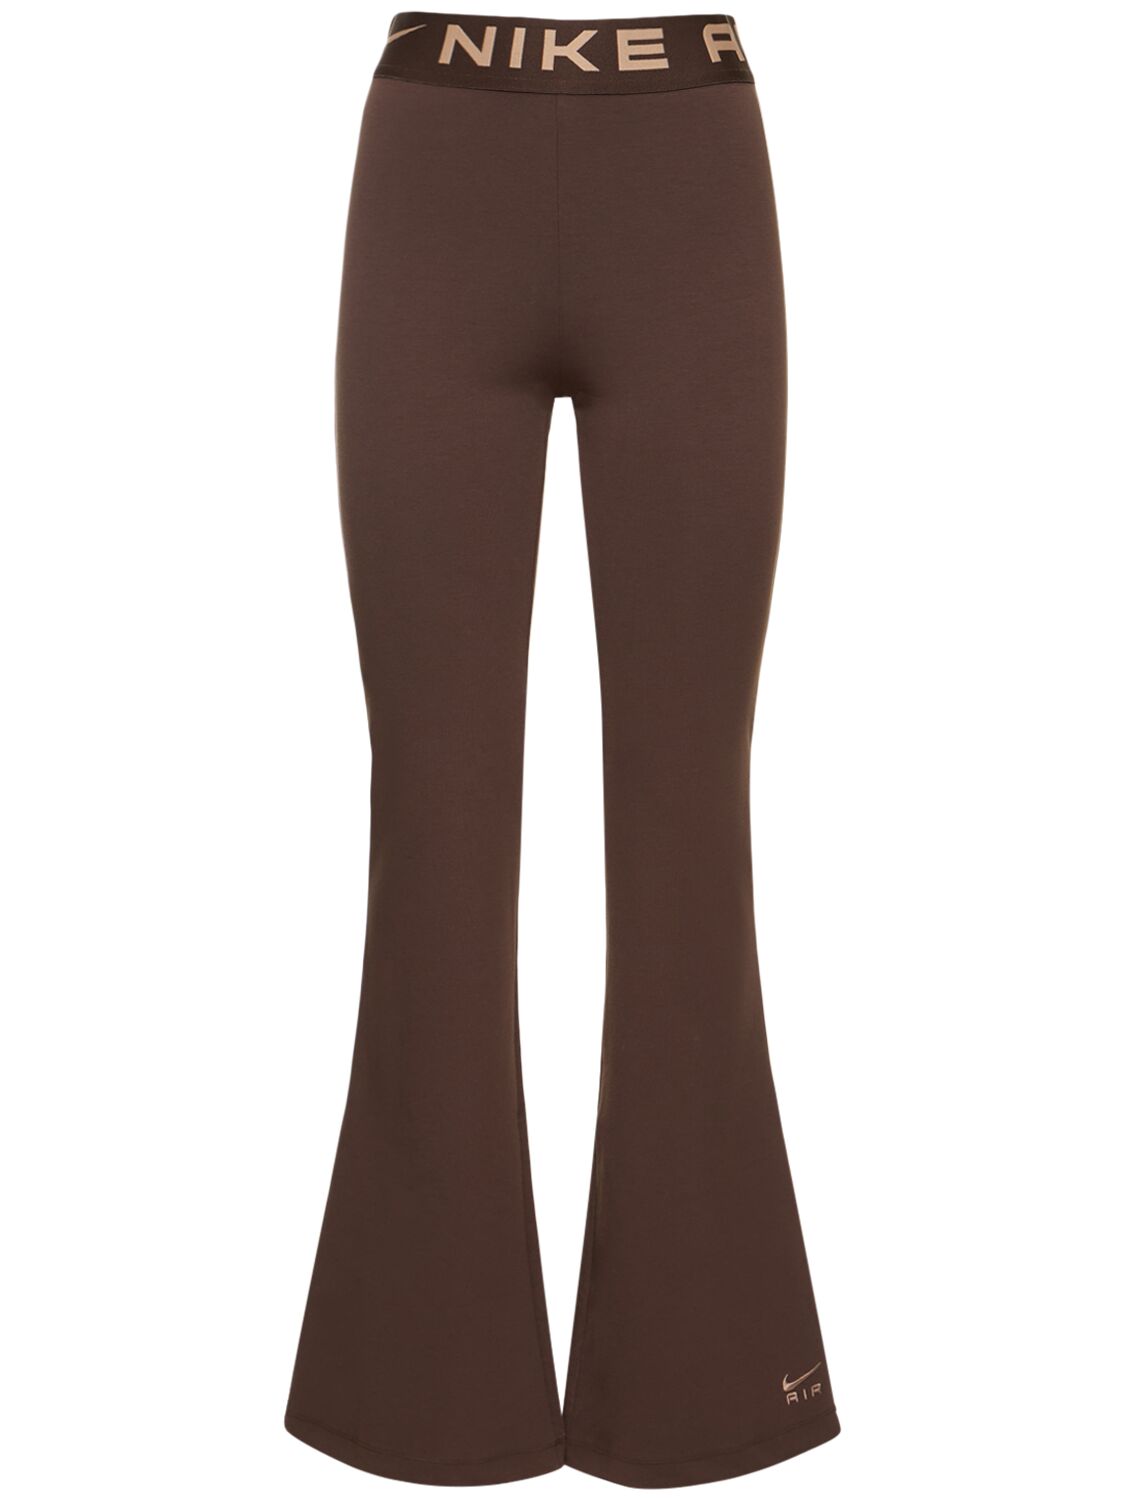 Nsw Air High Rise Tights – WOMEN > CLOTHING > PANTS